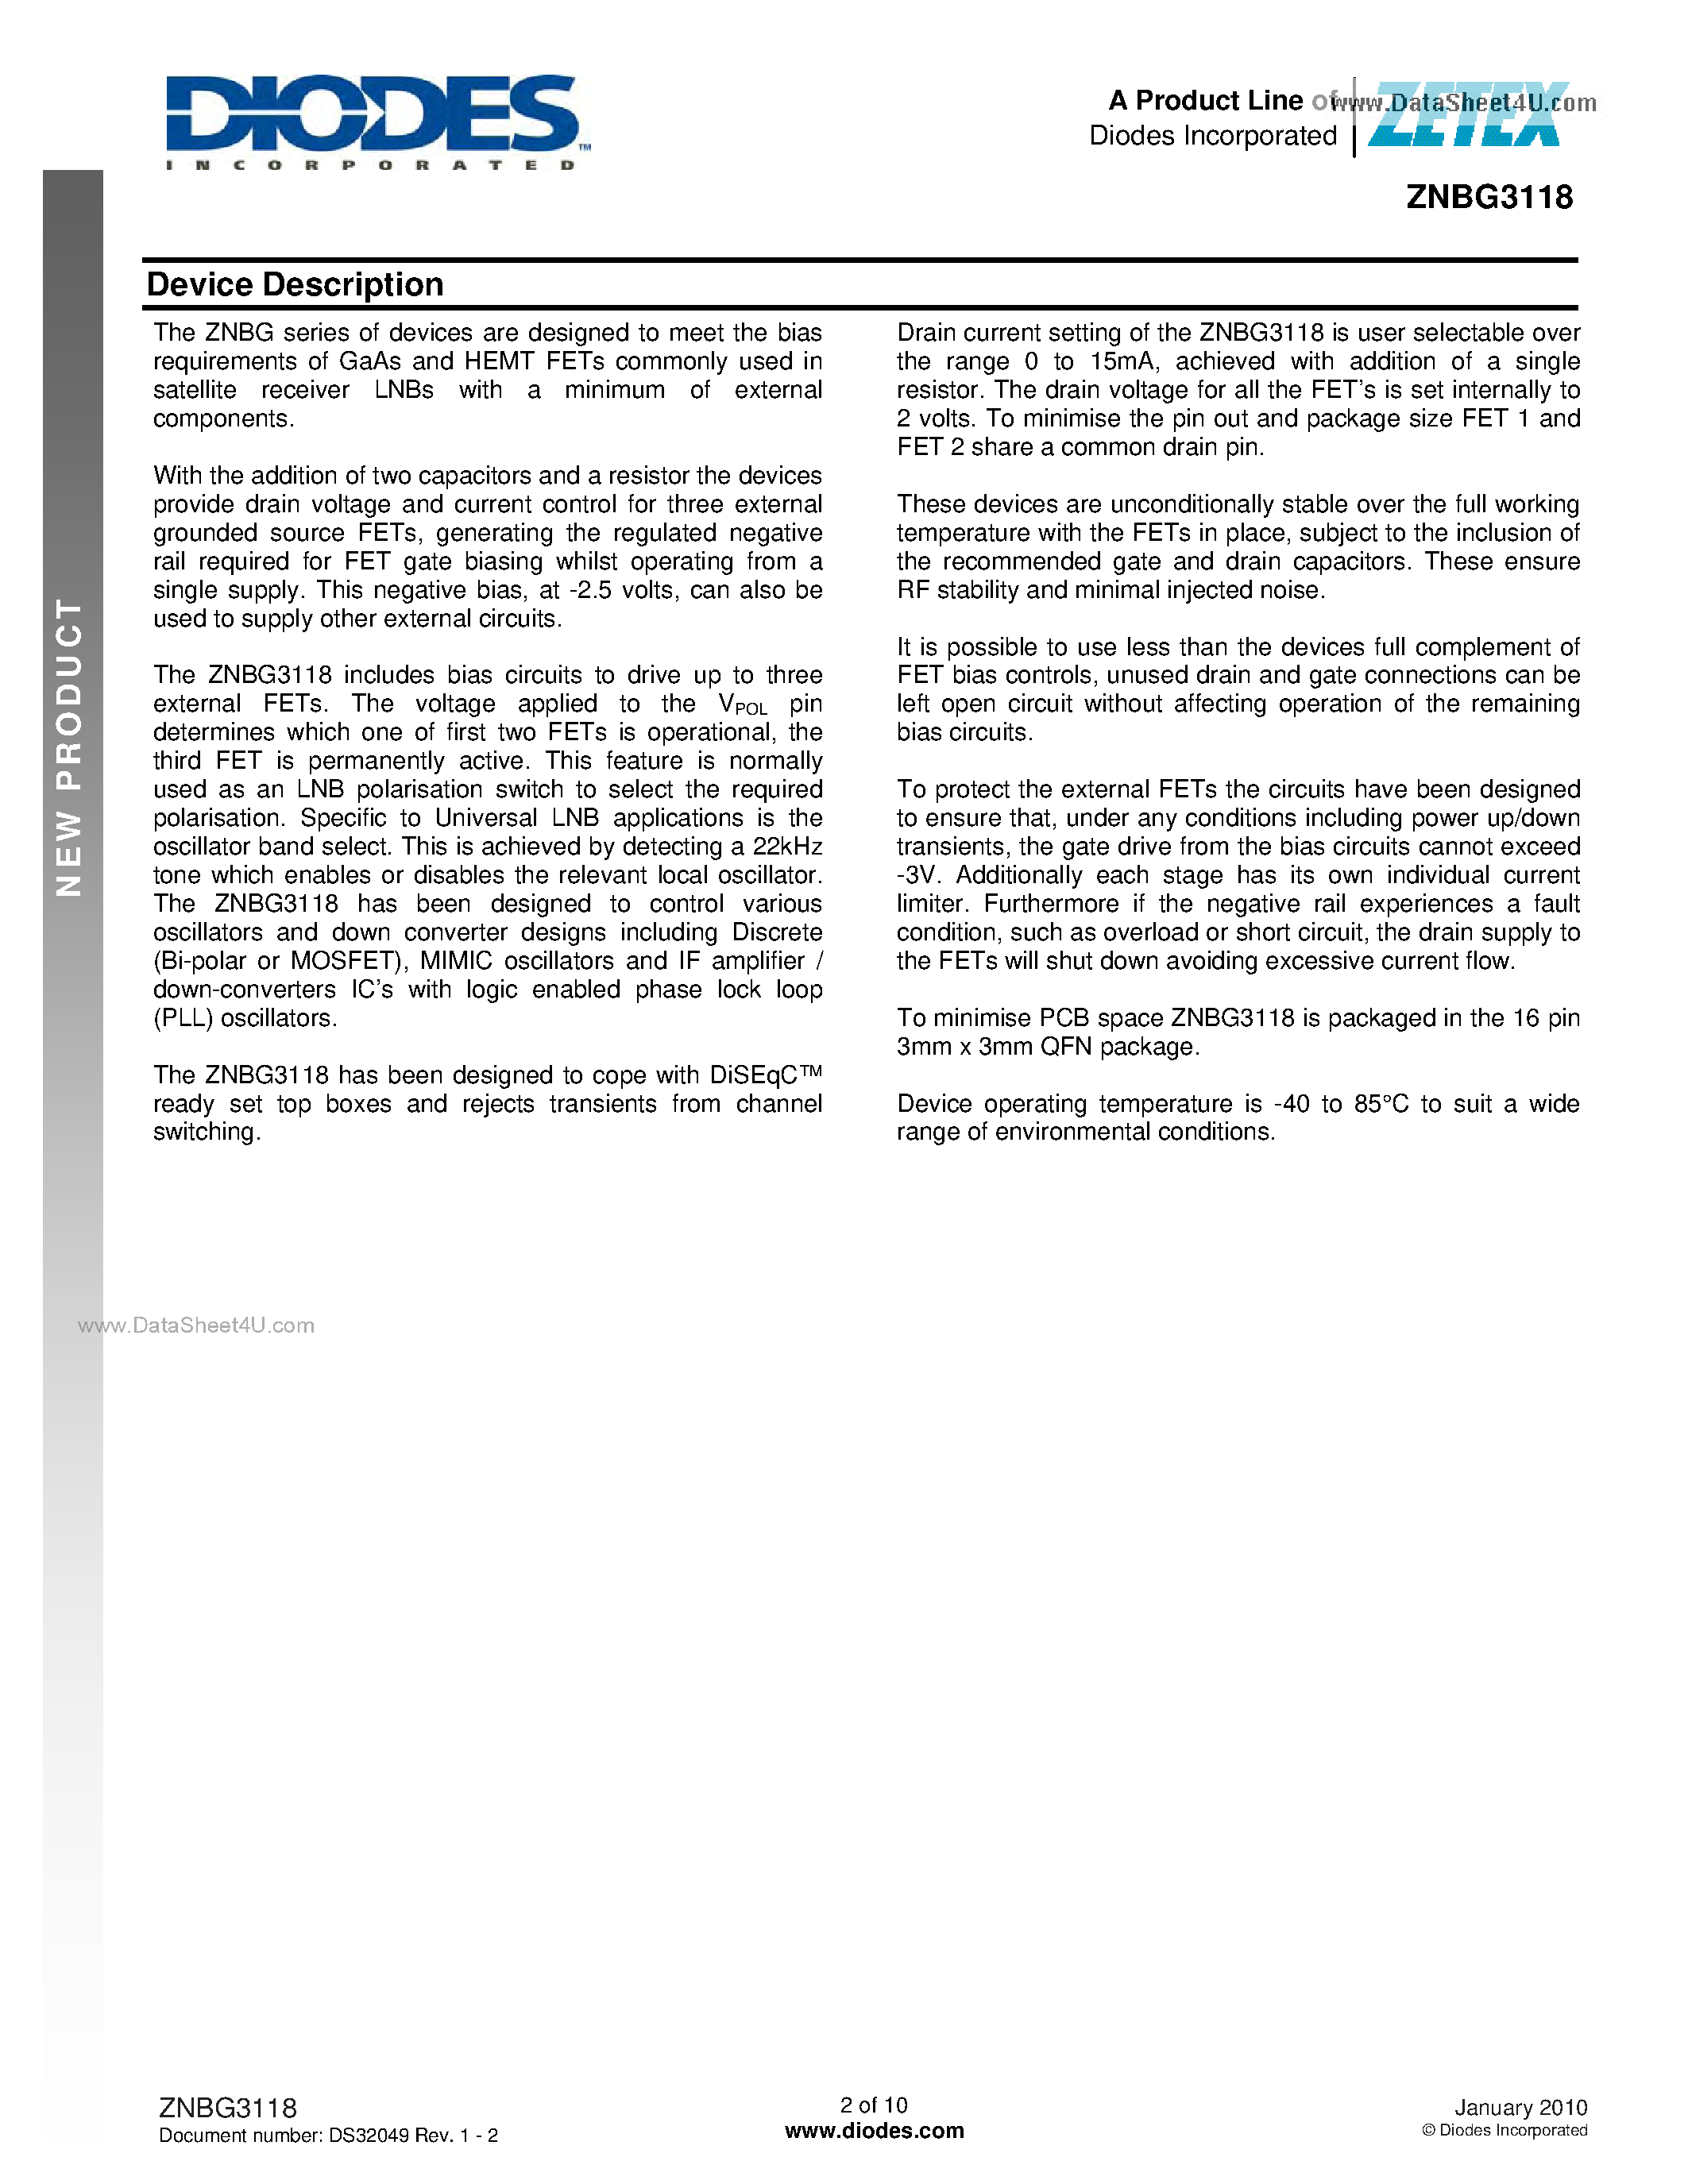 Datasheet ZNBG3118 - A Flexible Bias And Control Solution page 2